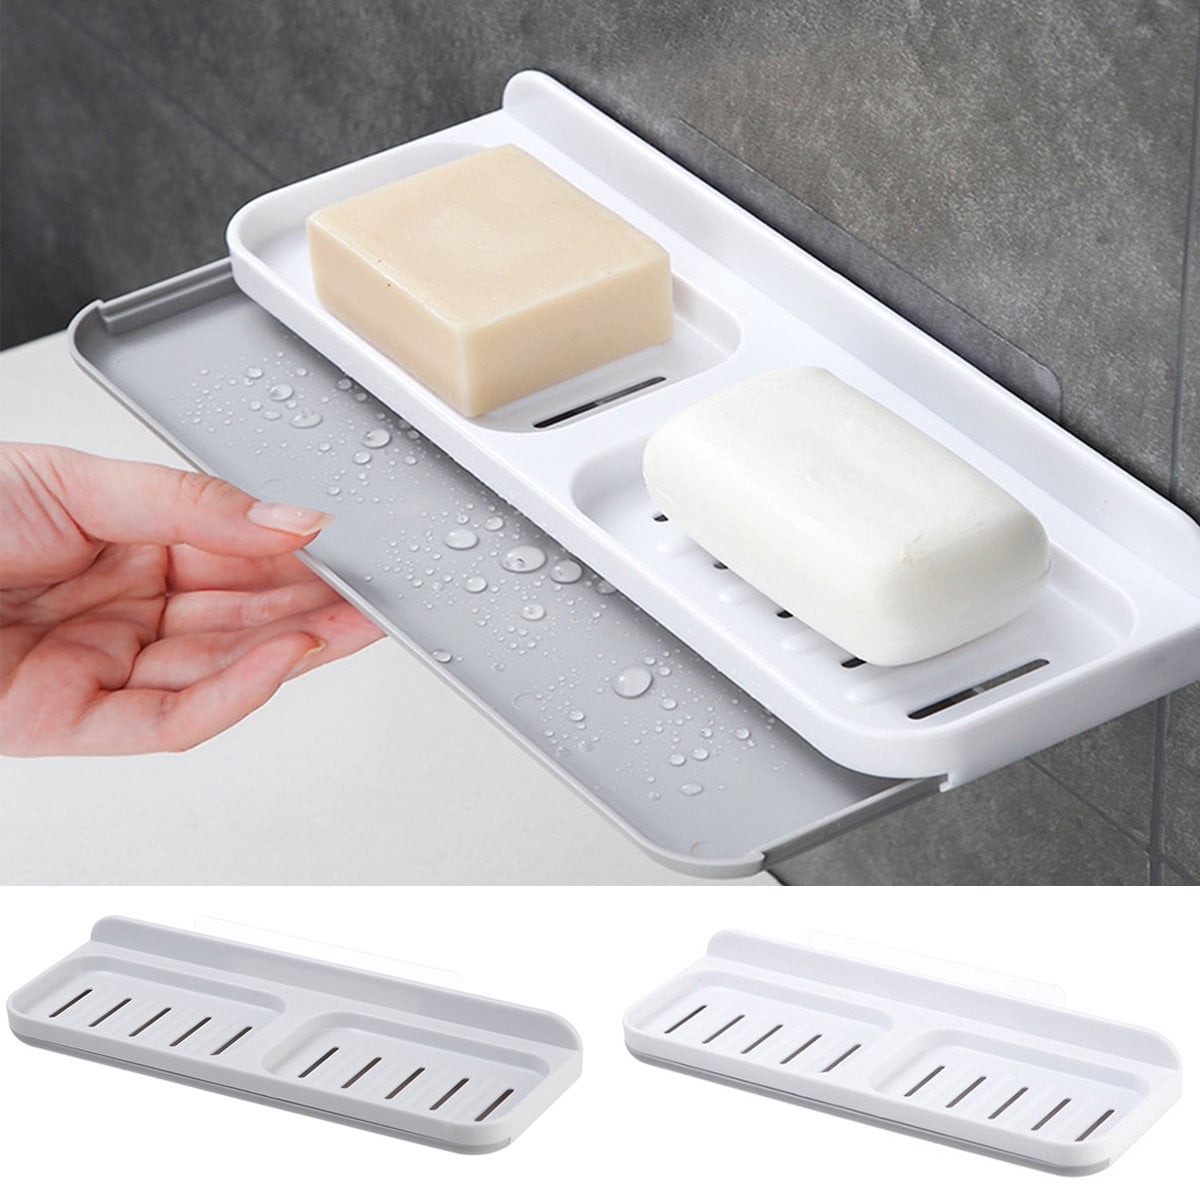 JOMOLA 2Pcs Adhesive Bar Soap Holder with Drip Tray Bathroom soap Dish  Holder for Shower Wall Double Layer Soap Tray Kitchen Sink Sponge Holder  White